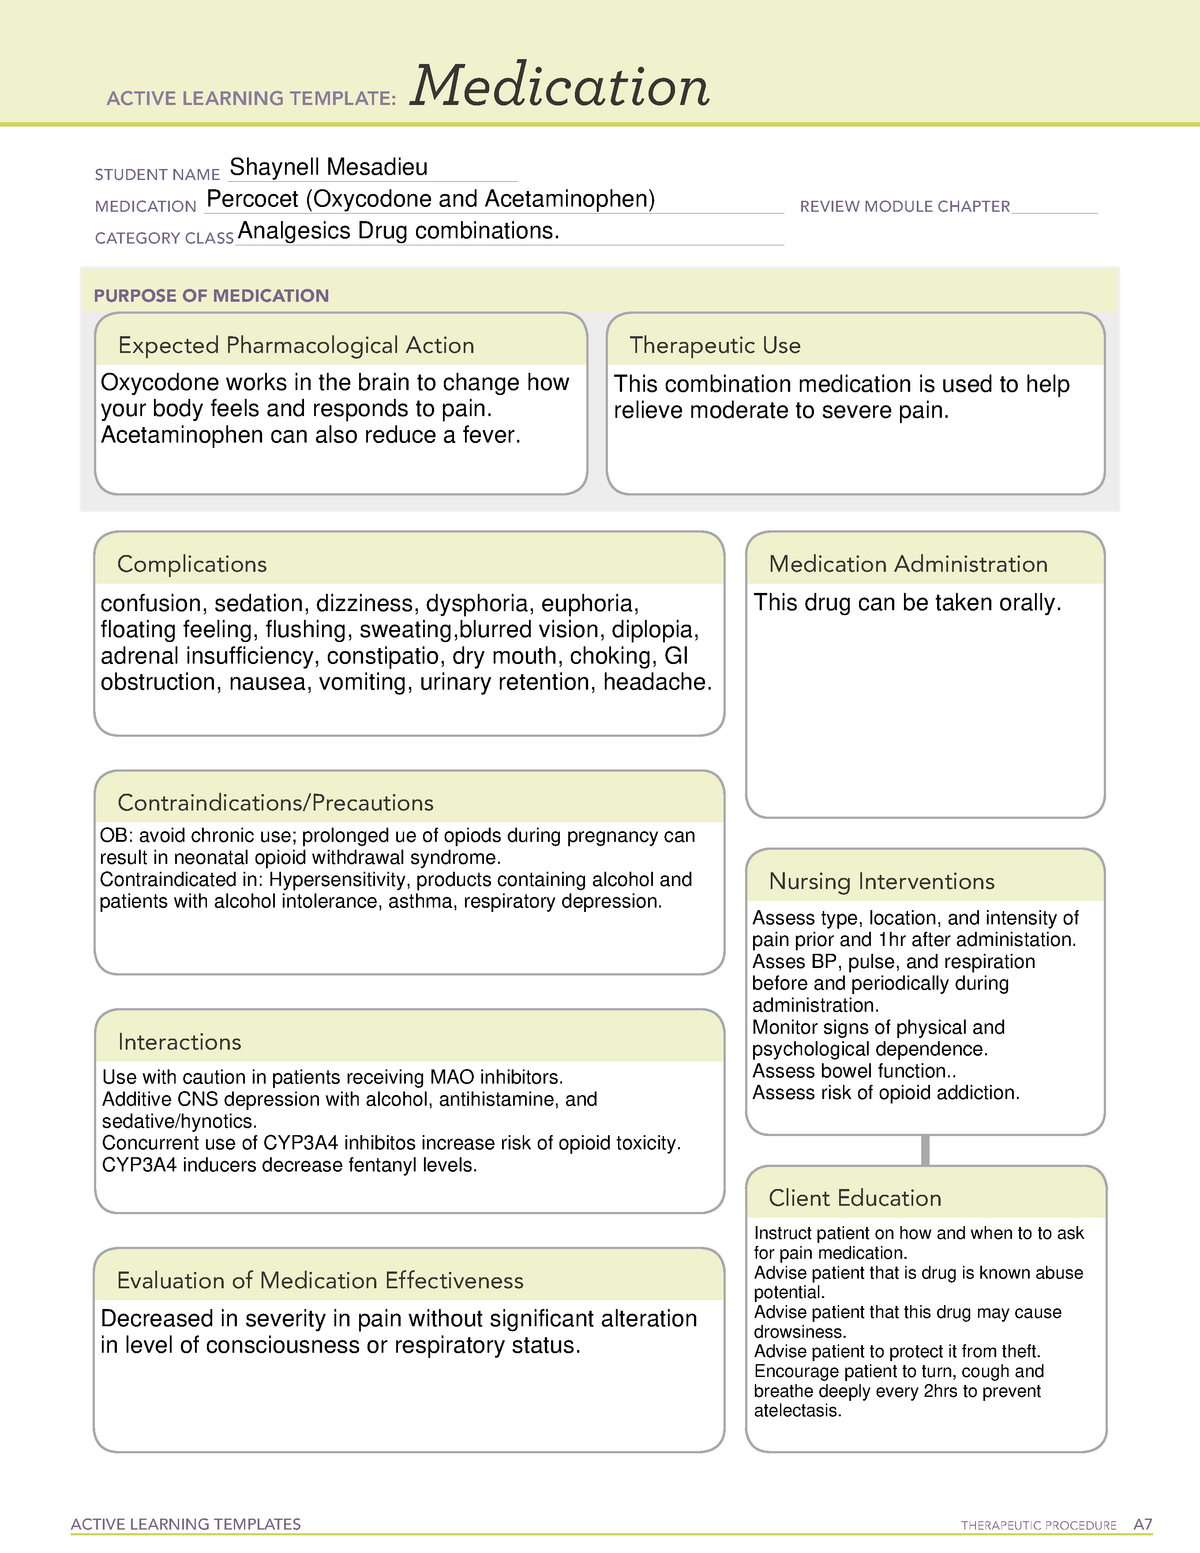 ATI learning template Percocet clinical ACTIVE LEARNING TEMPLATES